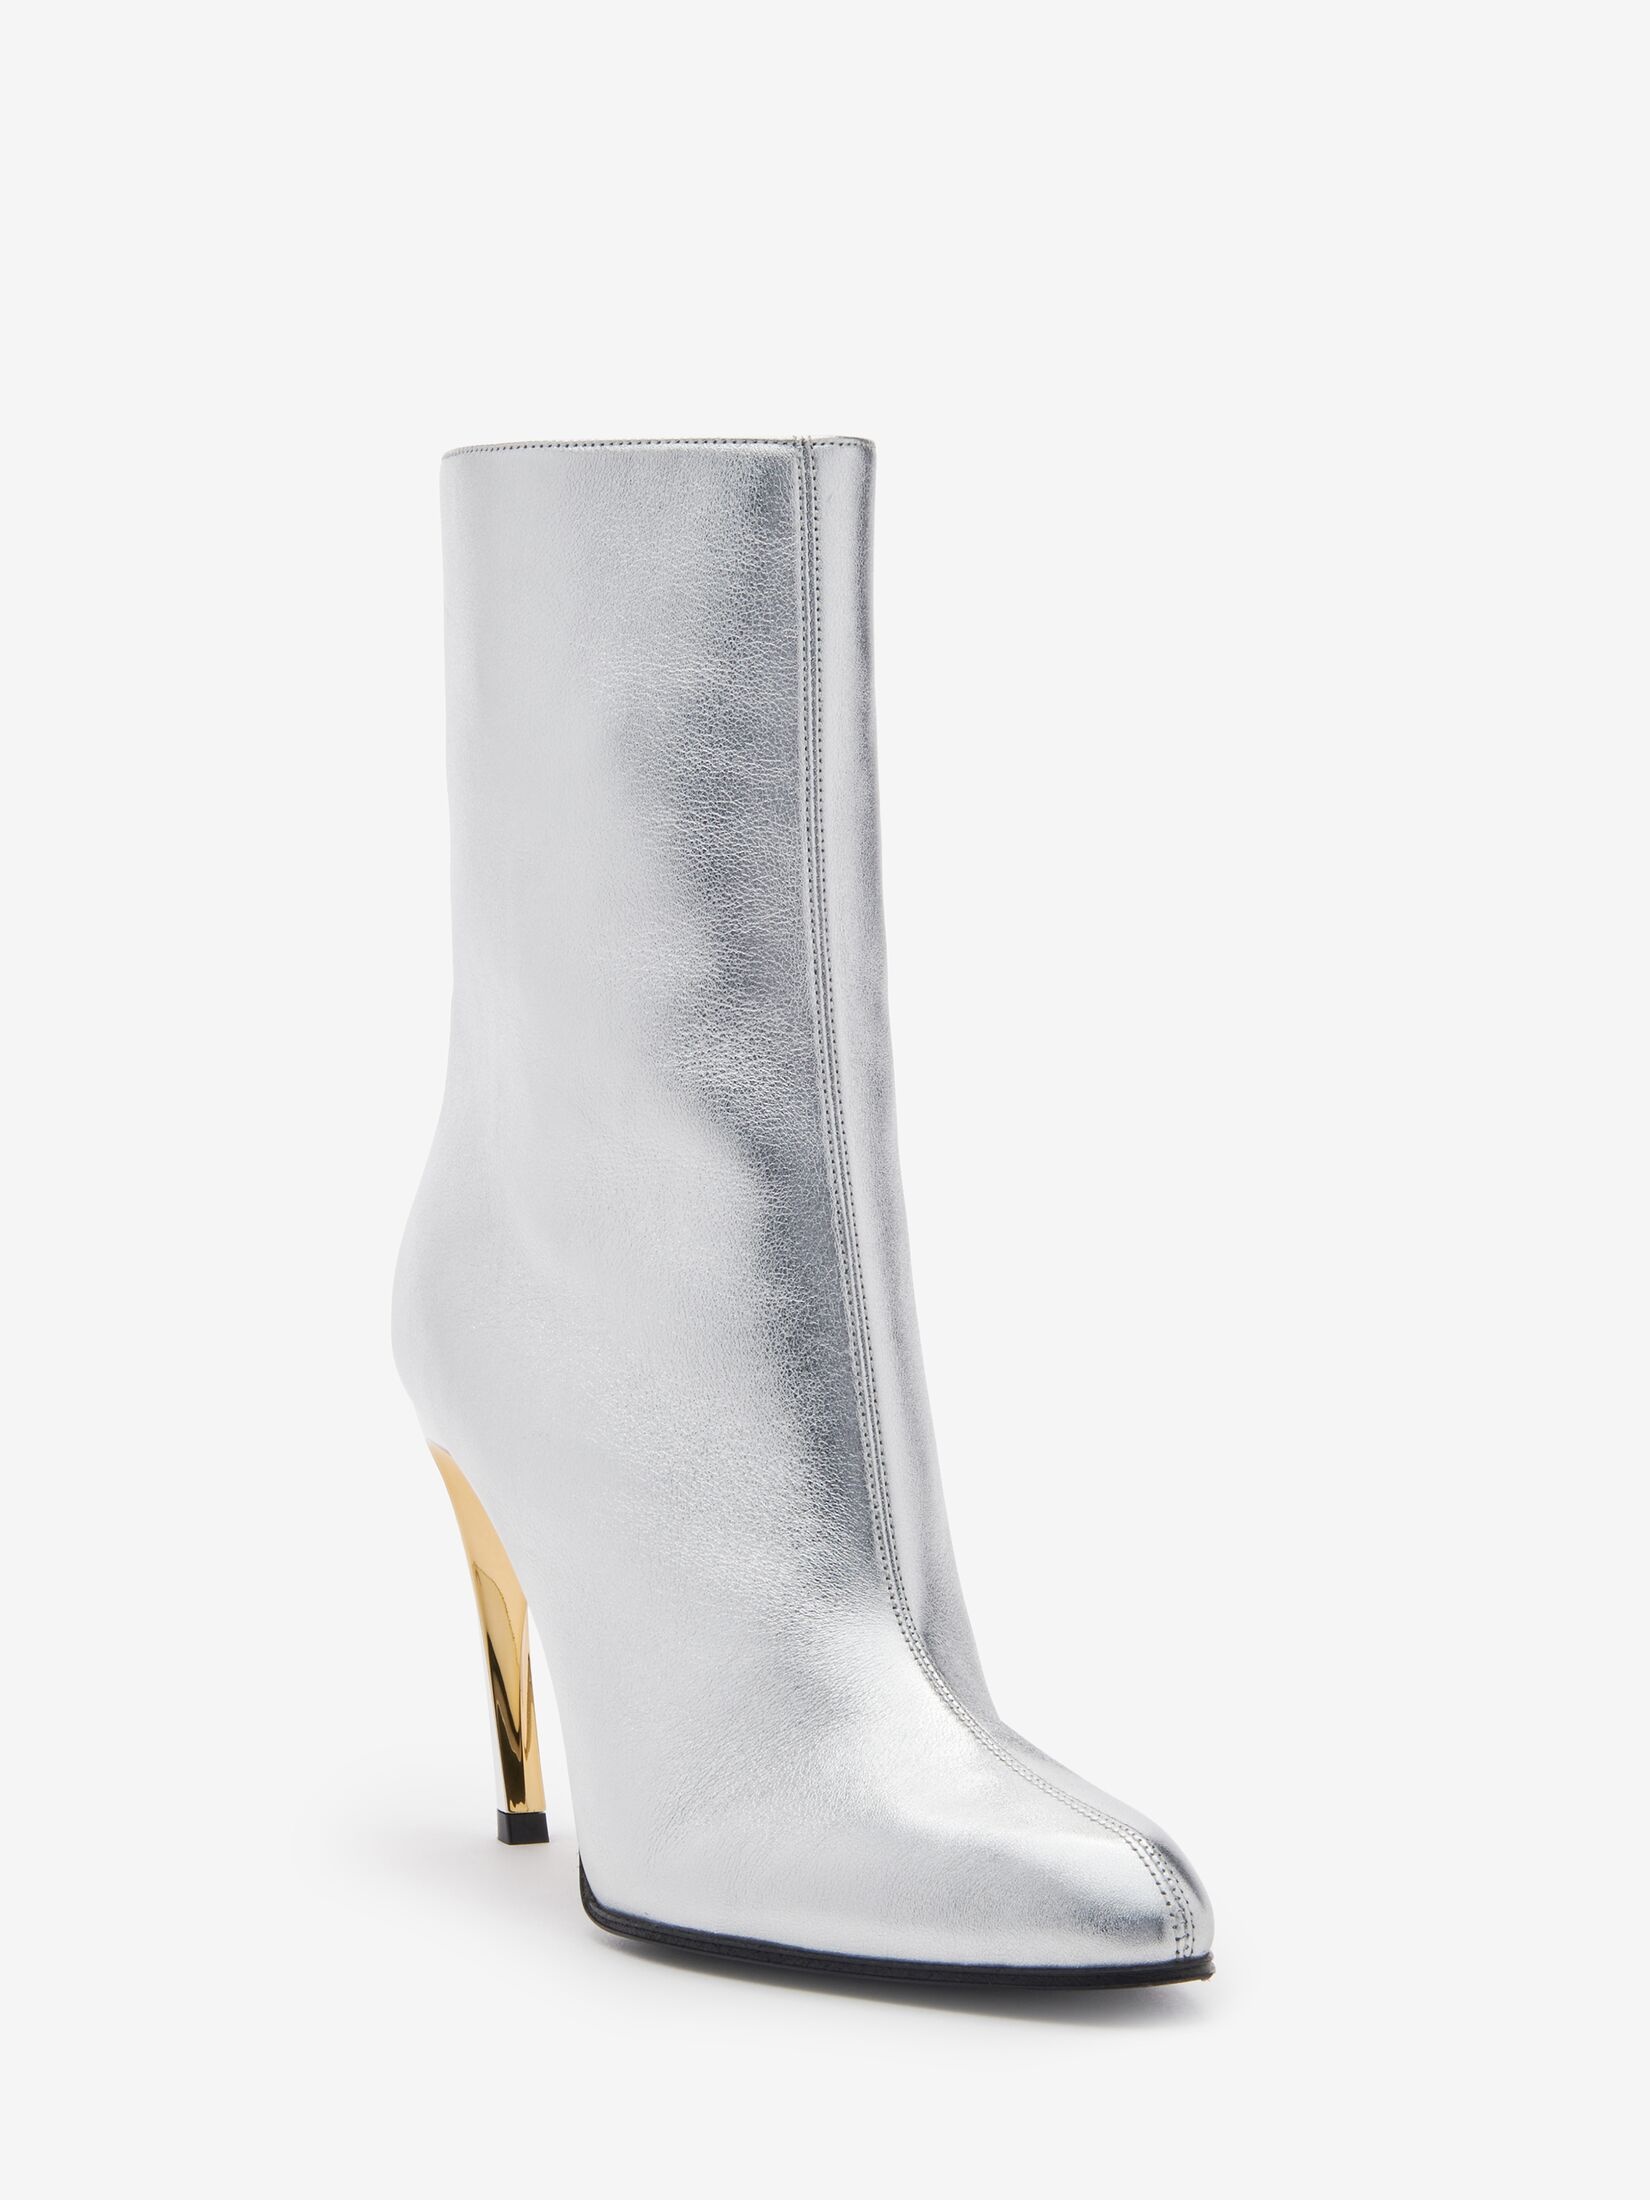 Women's Armadillo Ankle Boot in Silver/gold - 4